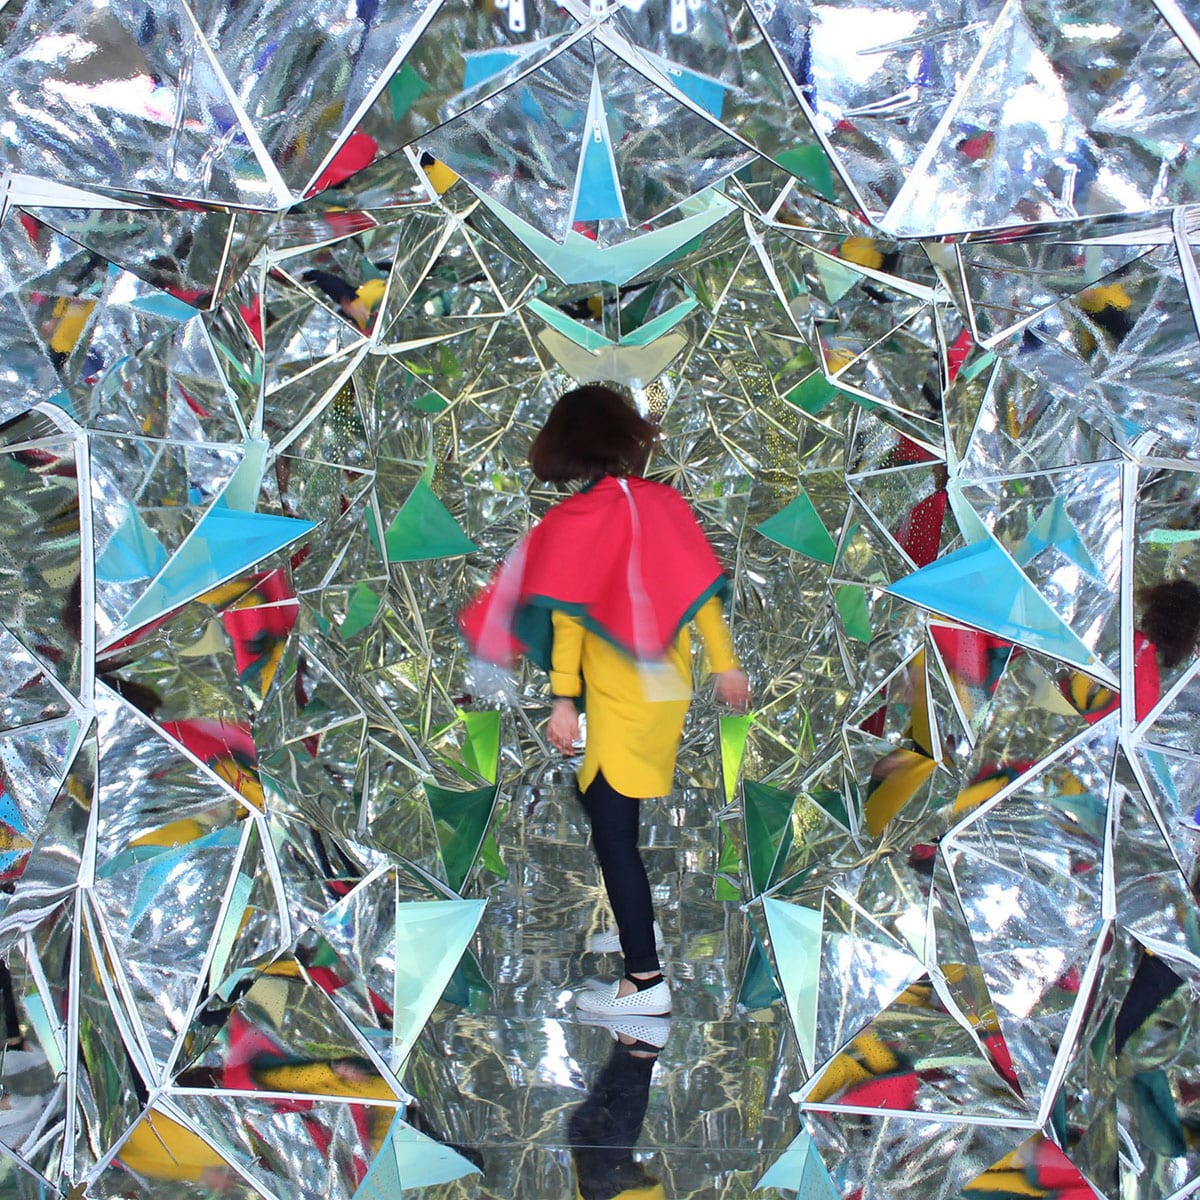 This Trippy Installation Lets You Go Inside a Kaleidoscope | Complex